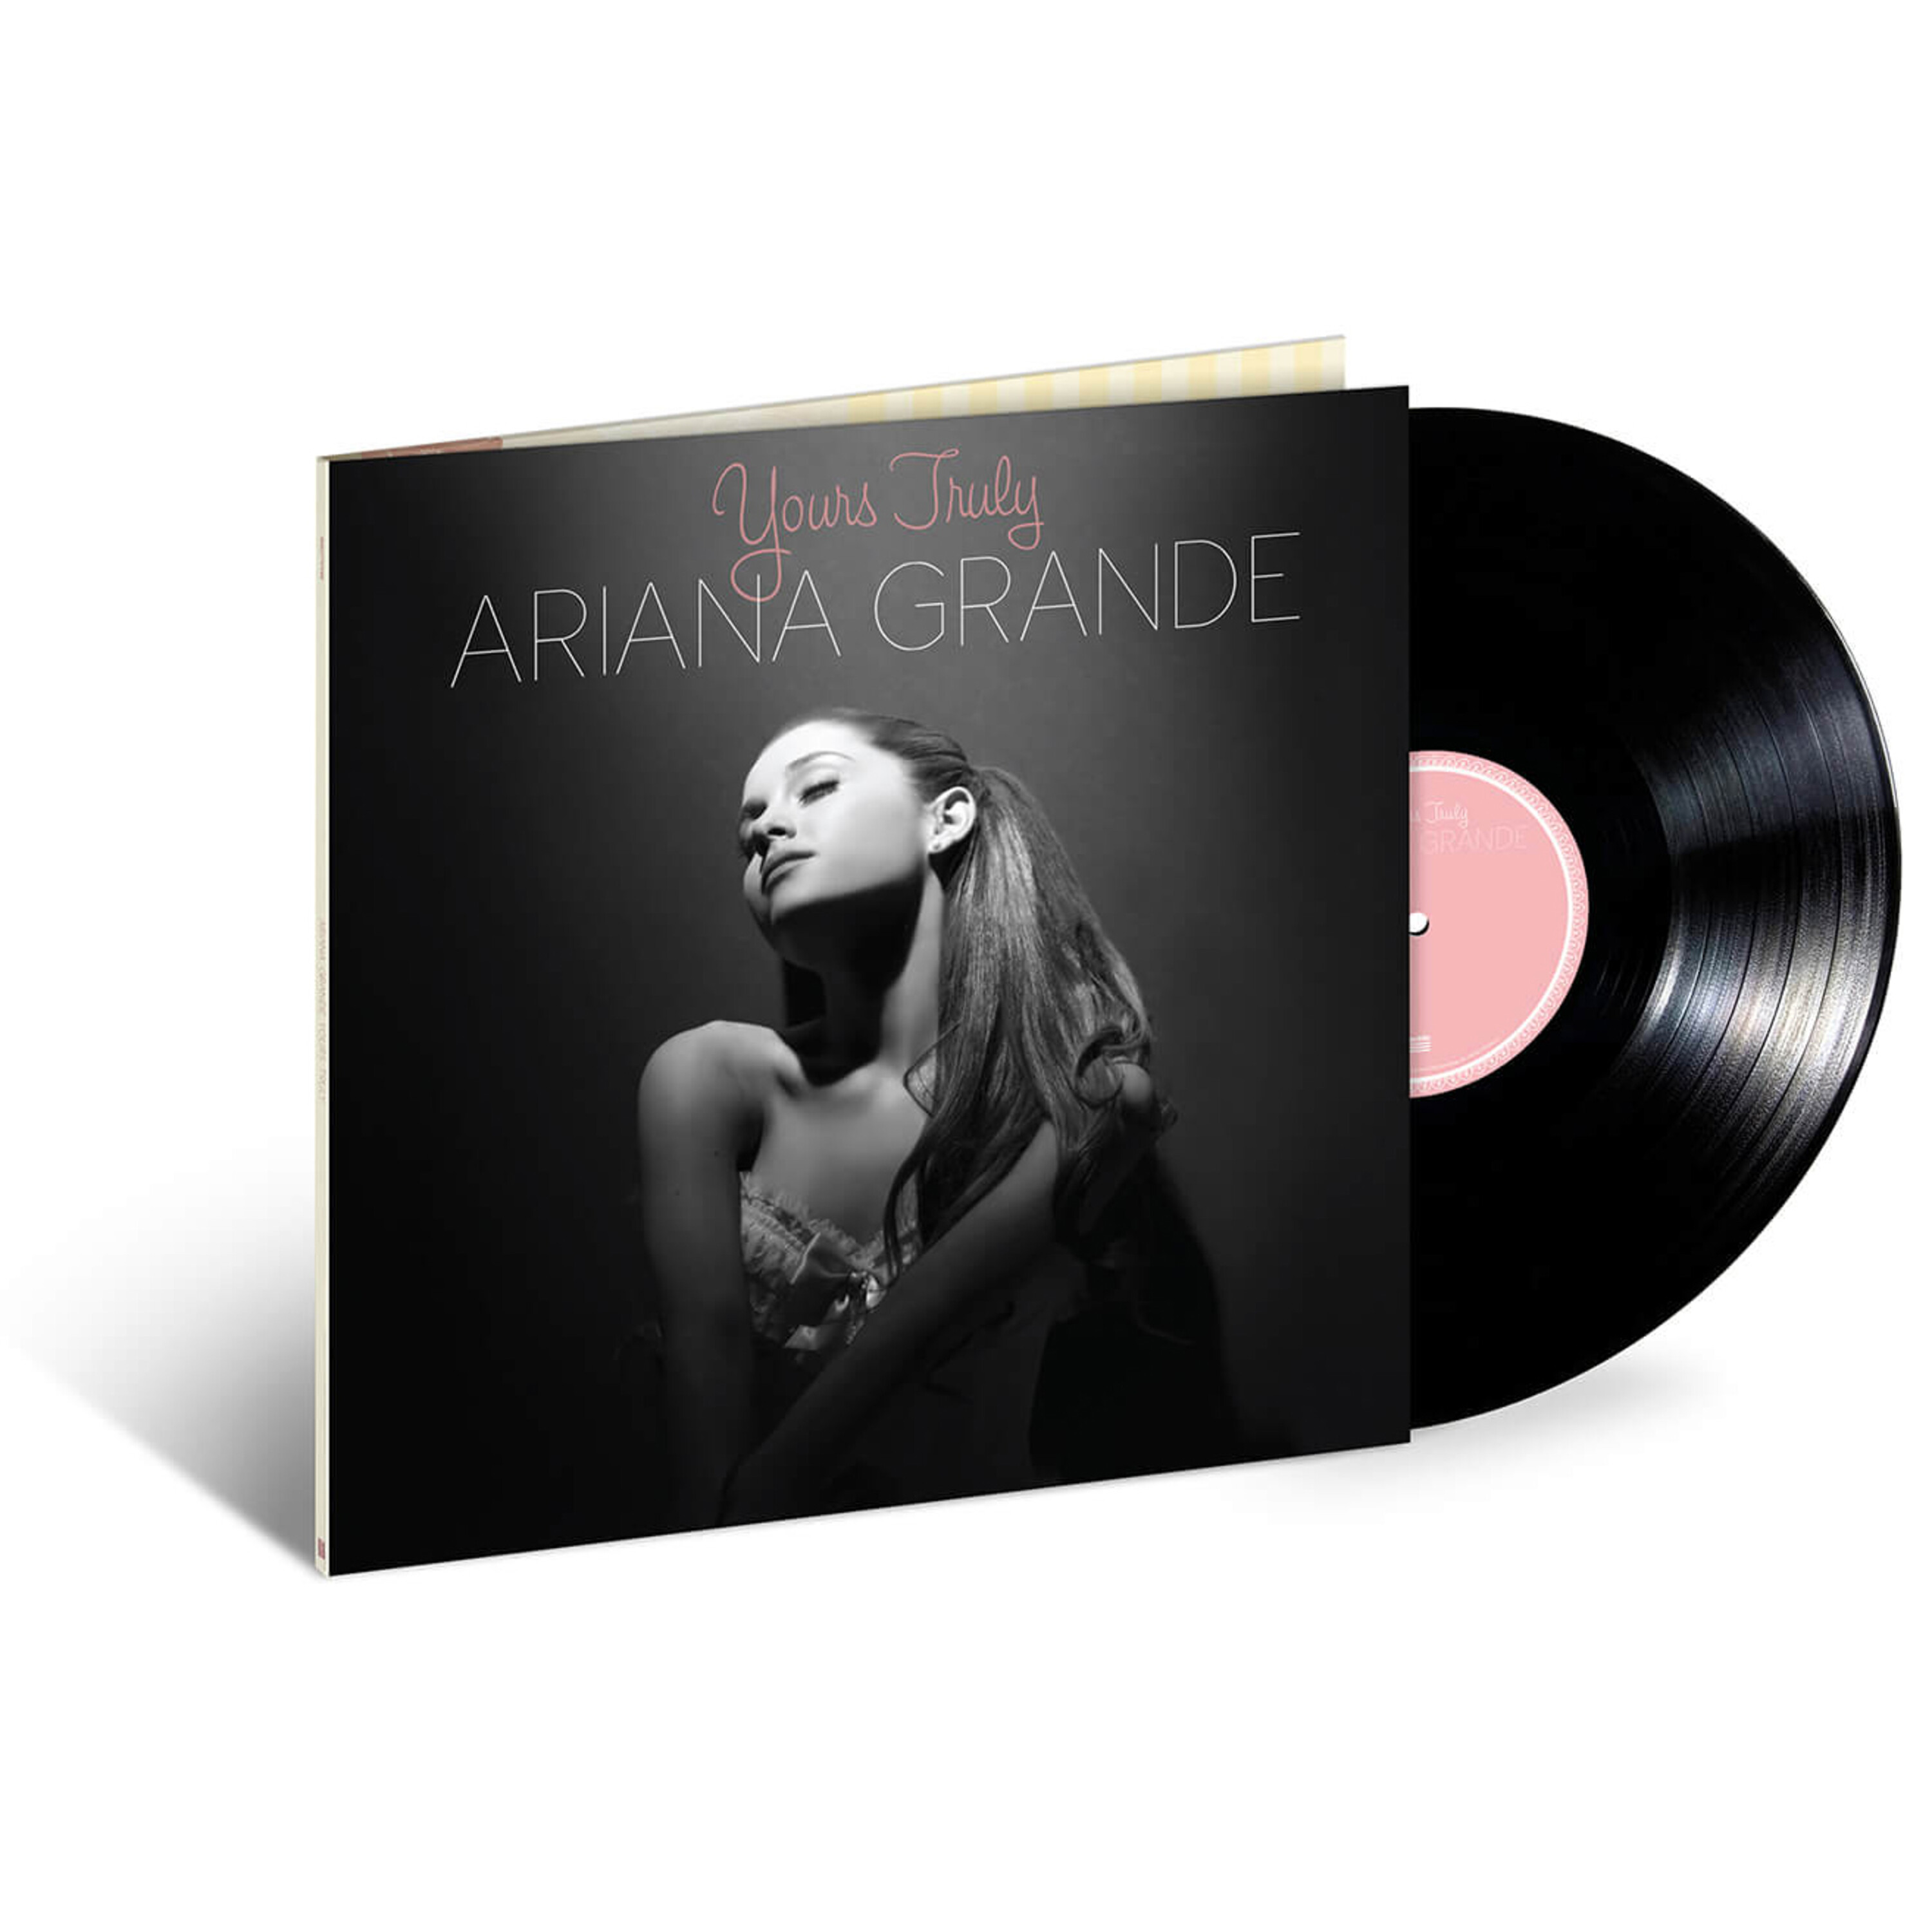 Universal Music Store - Yours Truly (LP Re-Issue) - Ariana Grande - Vinyl